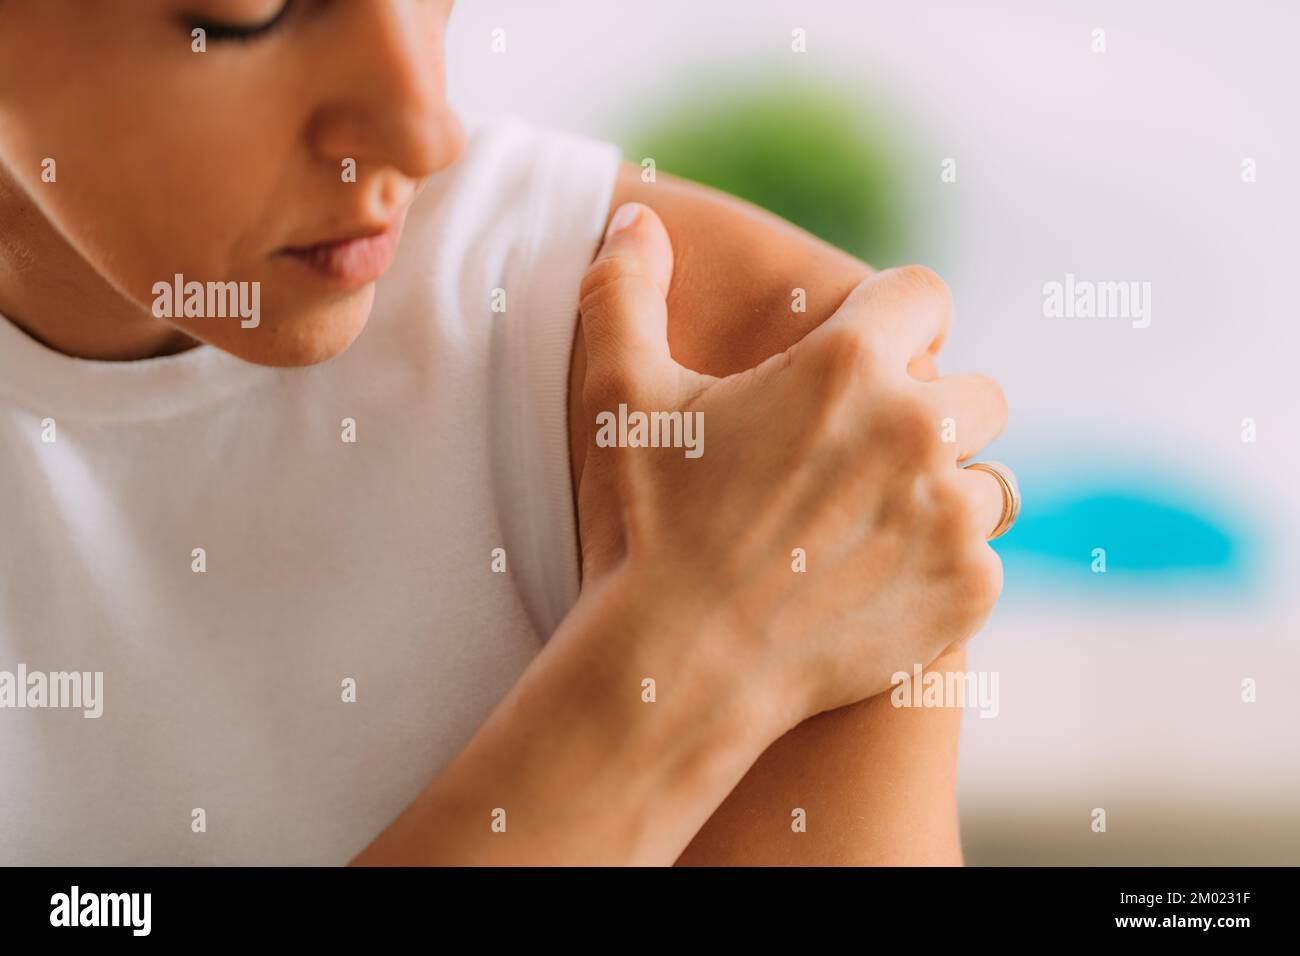 Woman holding onto painful shoulder. Stock Photo